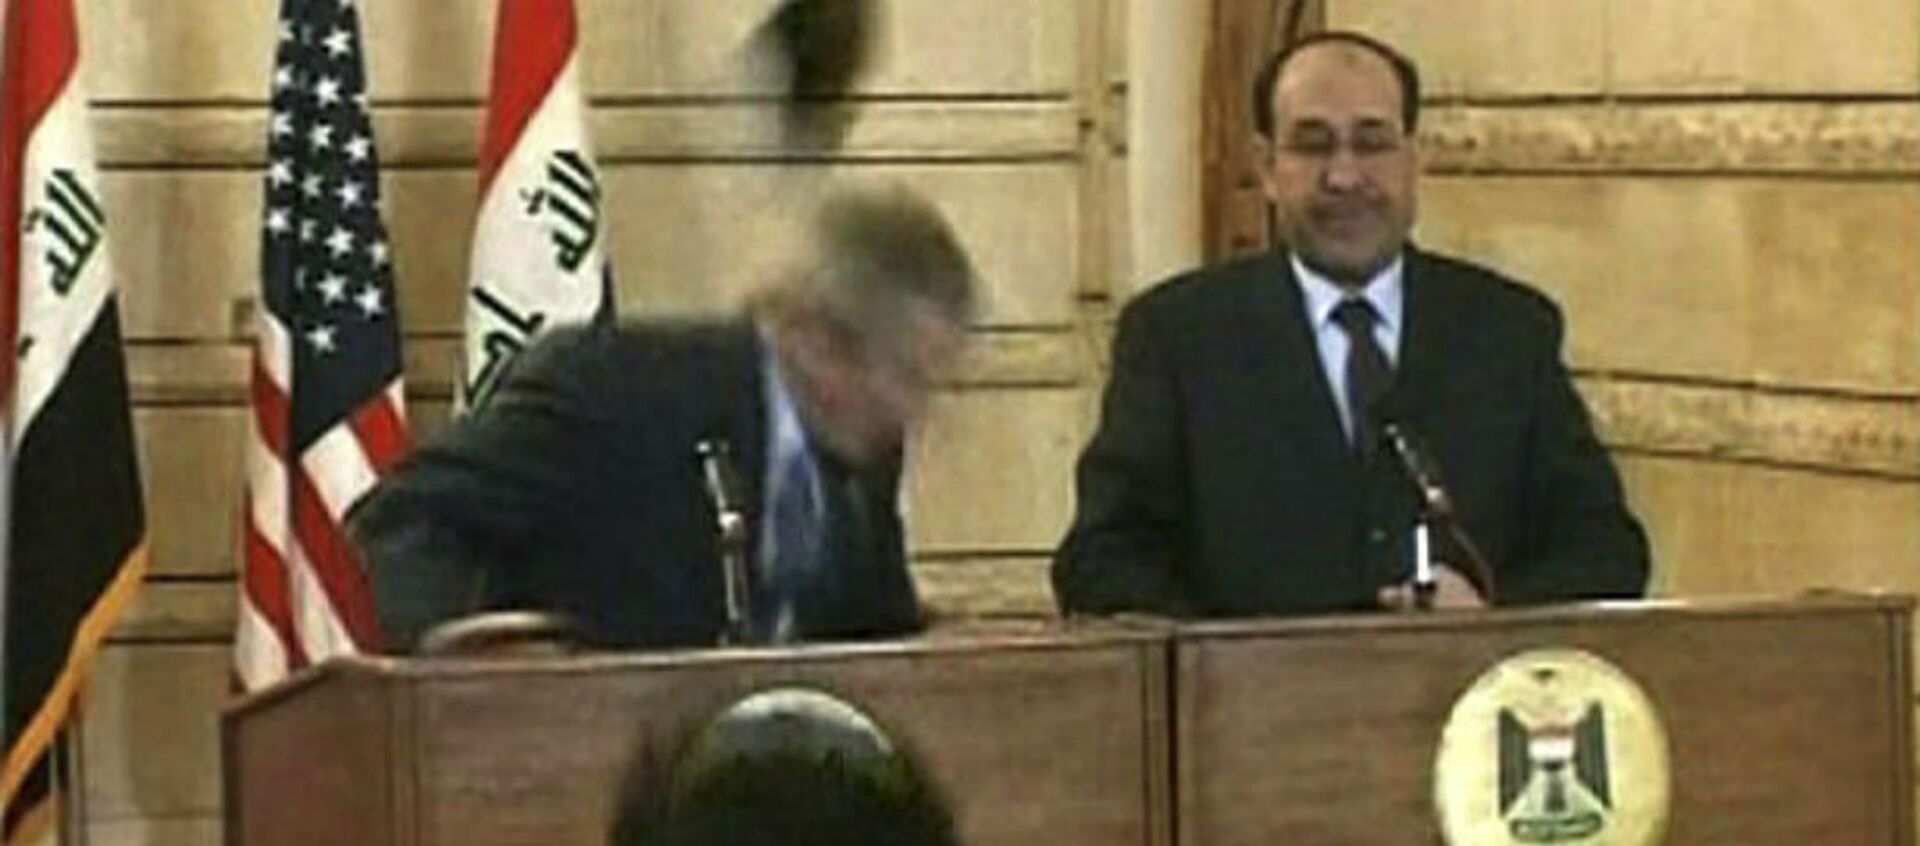 In this image from APTN video, a man throws a shoe at President George W. Bush during a news conference with Iraq Prime Minister Nouri al-Maliki on Sunday, Dec. 14, 2008, in Baghdad. The man threw two shoes at Bush, one after another. Bush ducked both throws, and neither man was hit. - Sputnik Brasil, 1920, 01.05.2018